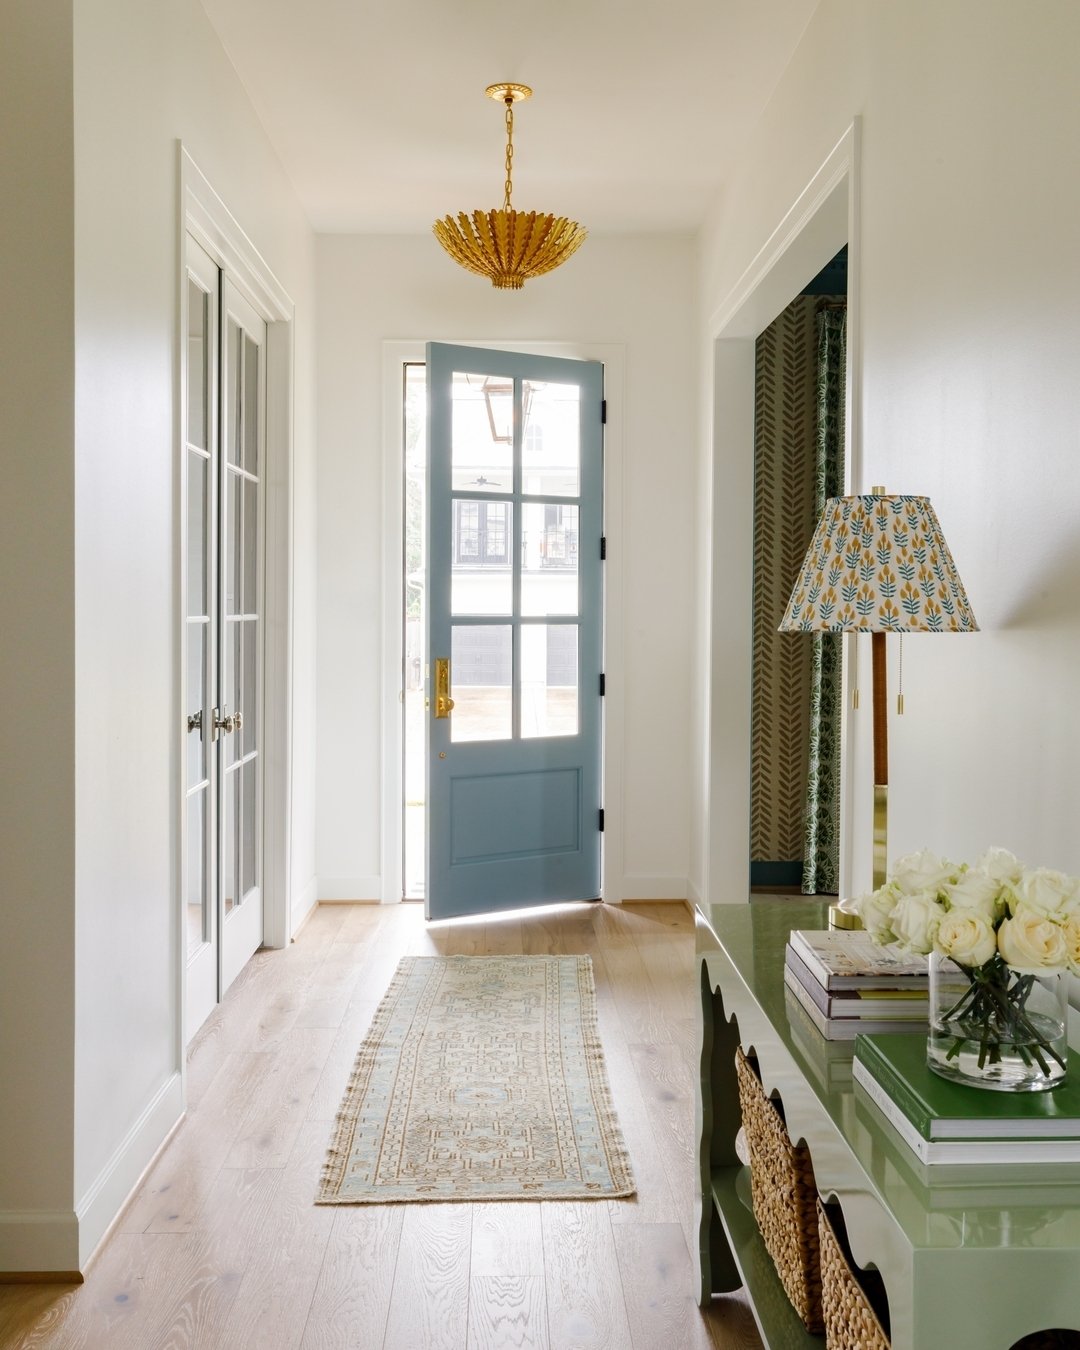 The front door, the final touch to a newly built house. 

Designer @alliweaverdesigns
Photography @rachelalysemanning